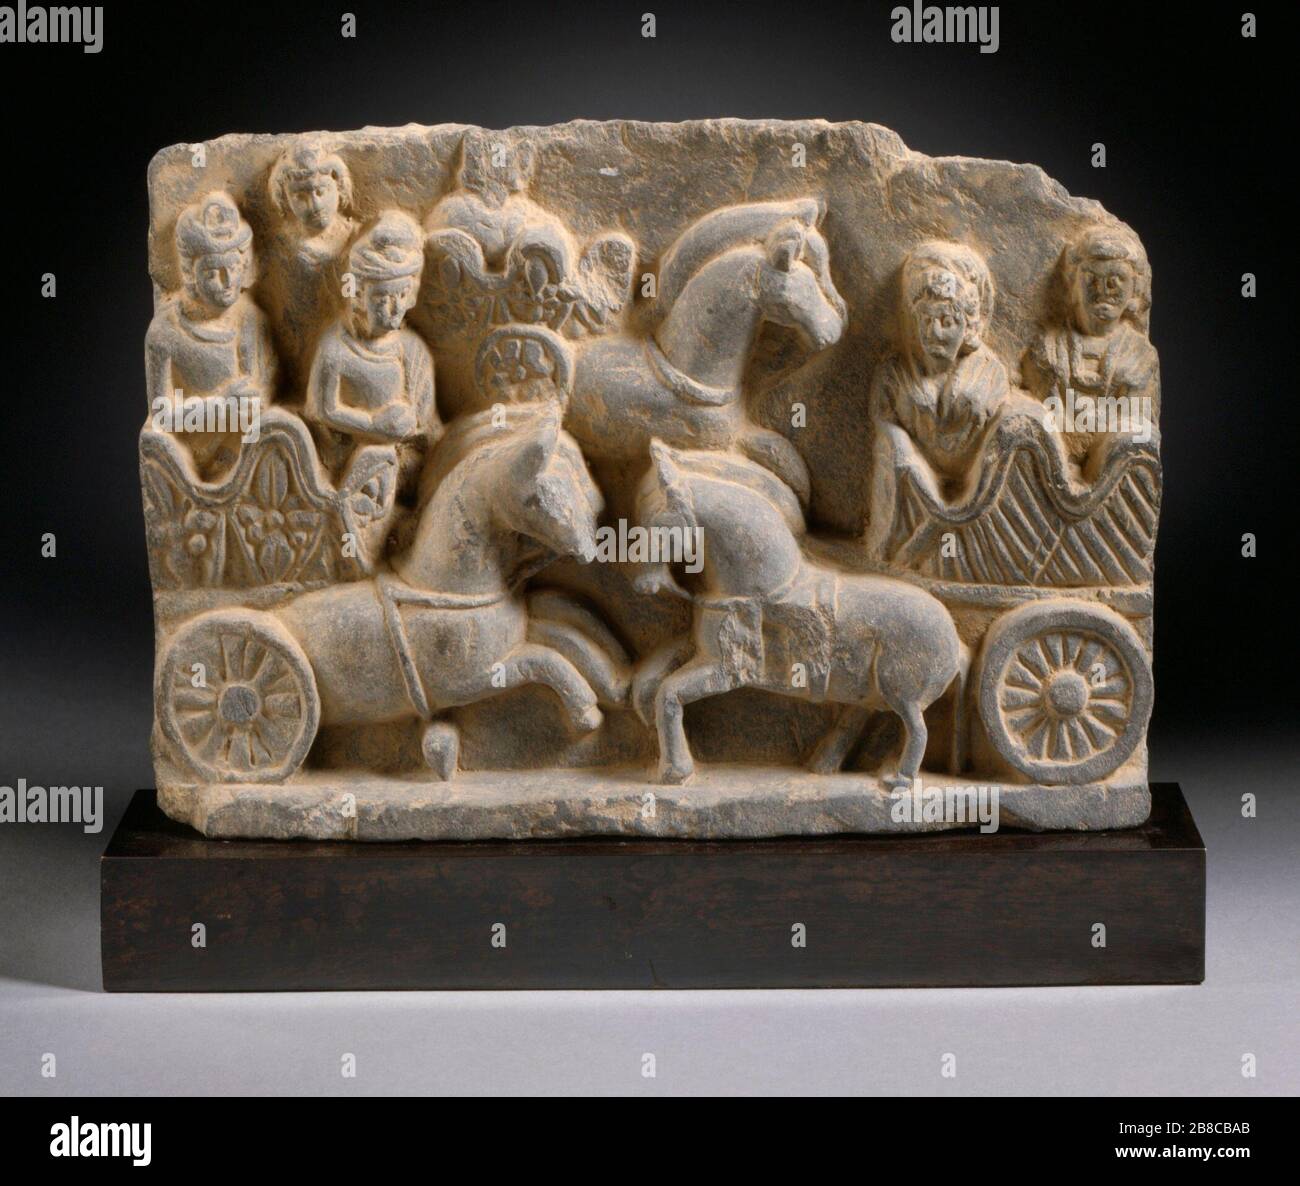 'Chariot Scene; English:  Pakistan, Gandhara region, 3rd century Sculpture Gray schist 11 7/8 x 8 1/8 x 1 3/4 in. (30.16 x 20.63 x 4.45 cm) Anonymous gift (M.89.159.2) South and Southeast Asian Art; 3rd century date QS:P571,+250-00-00T00:00:00Z/7; ' Stock Photo